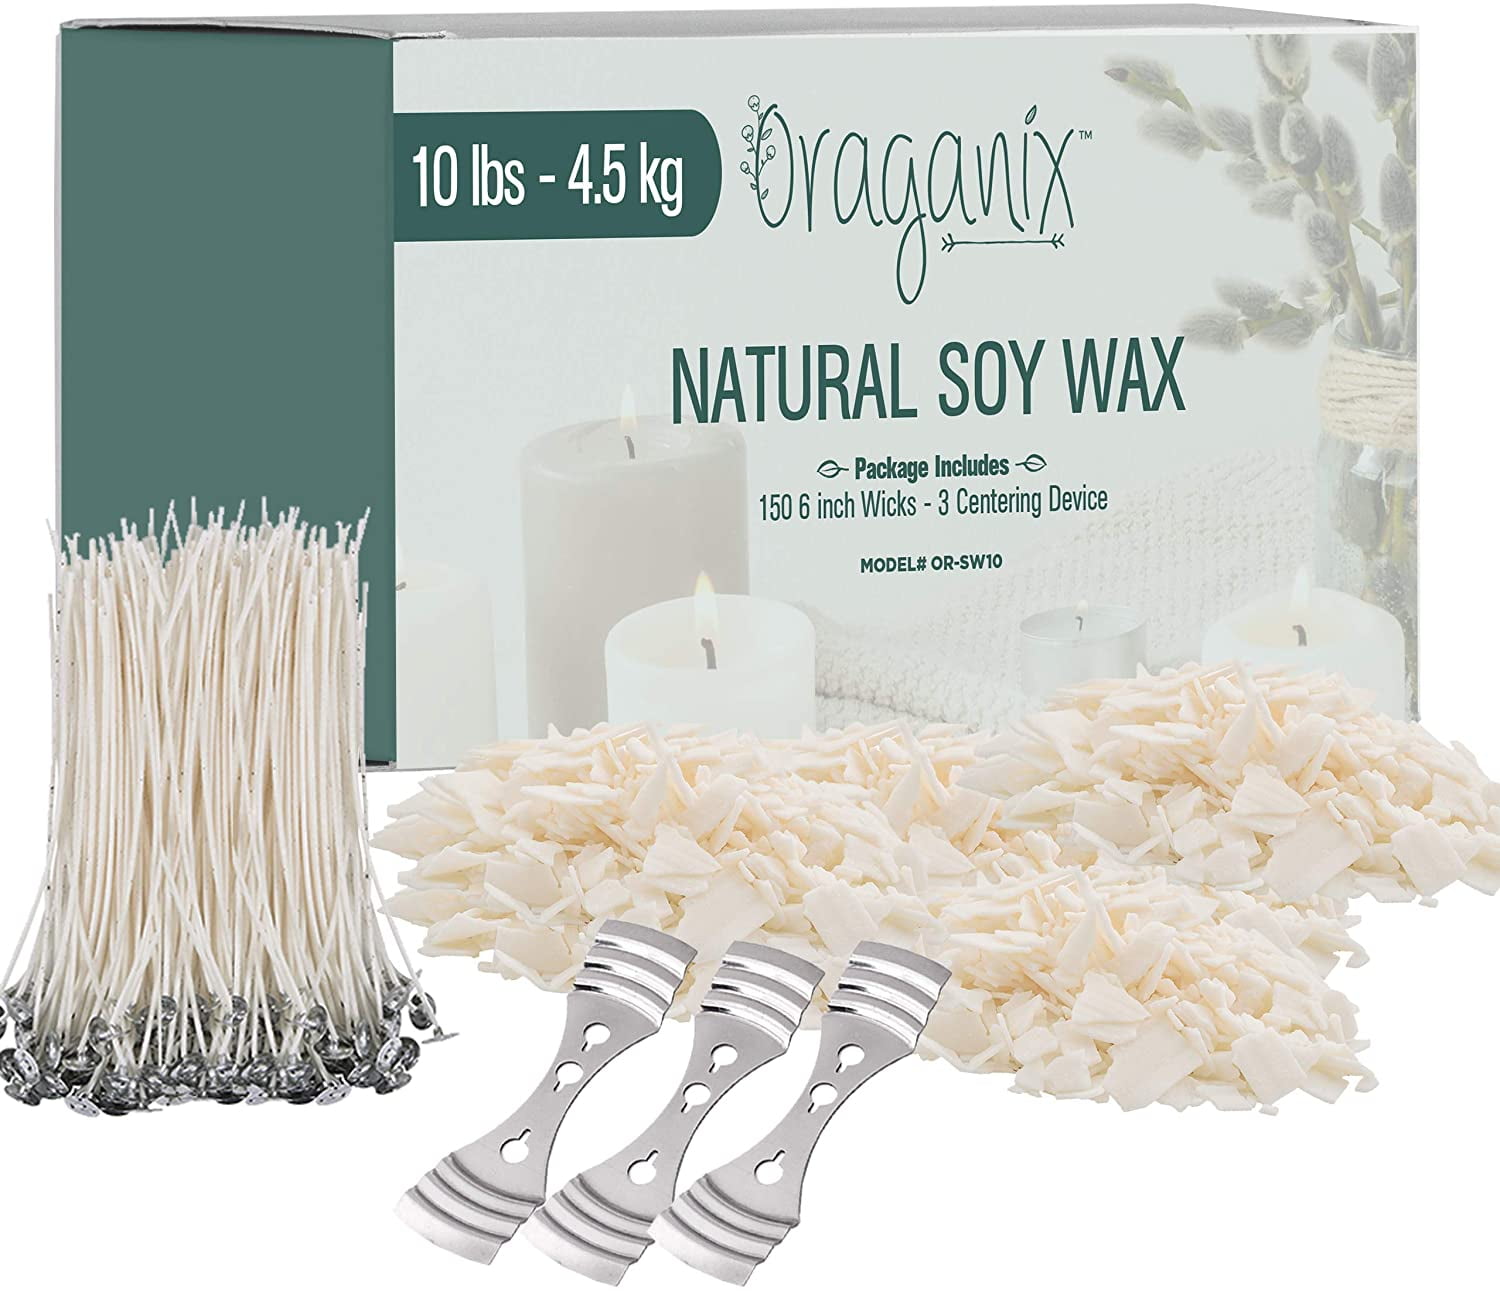 American Soy Organics Millennium Wax - 10 lb Bag of Natural Soy Wax for Candle Making